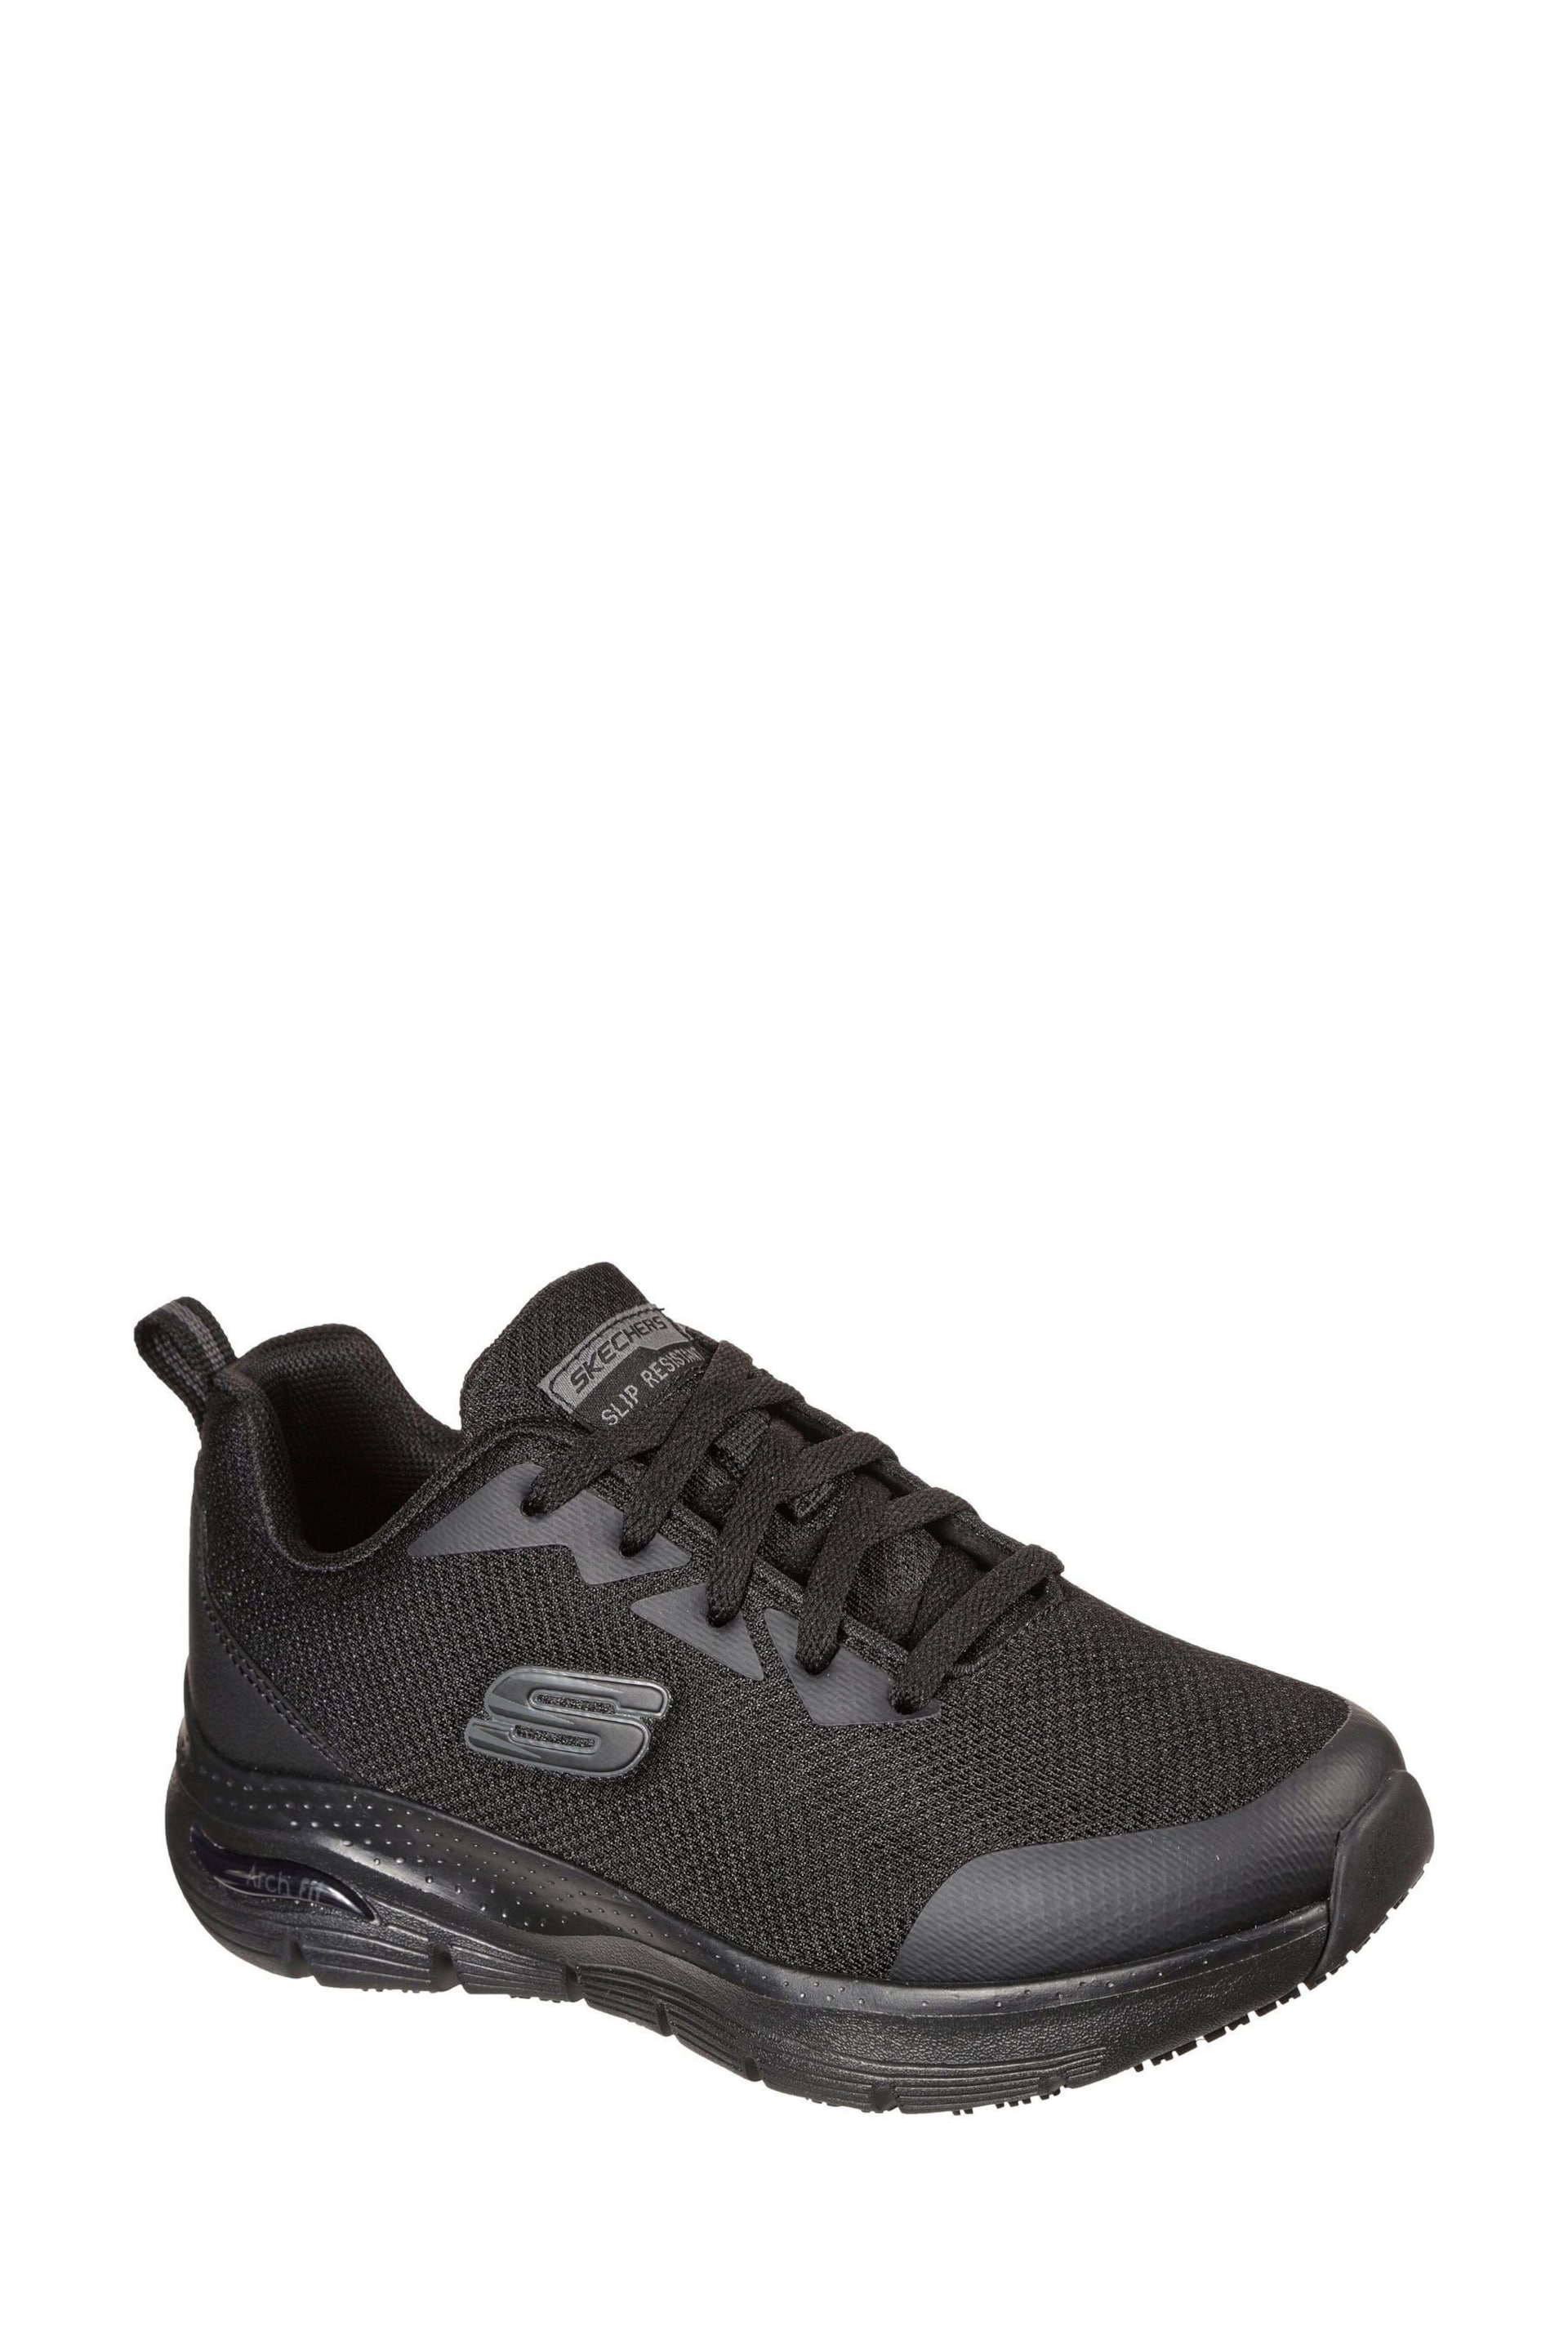 Skechers Black Work Arch Fit Slip Resistant Womens Trainers - Image 3 of 5